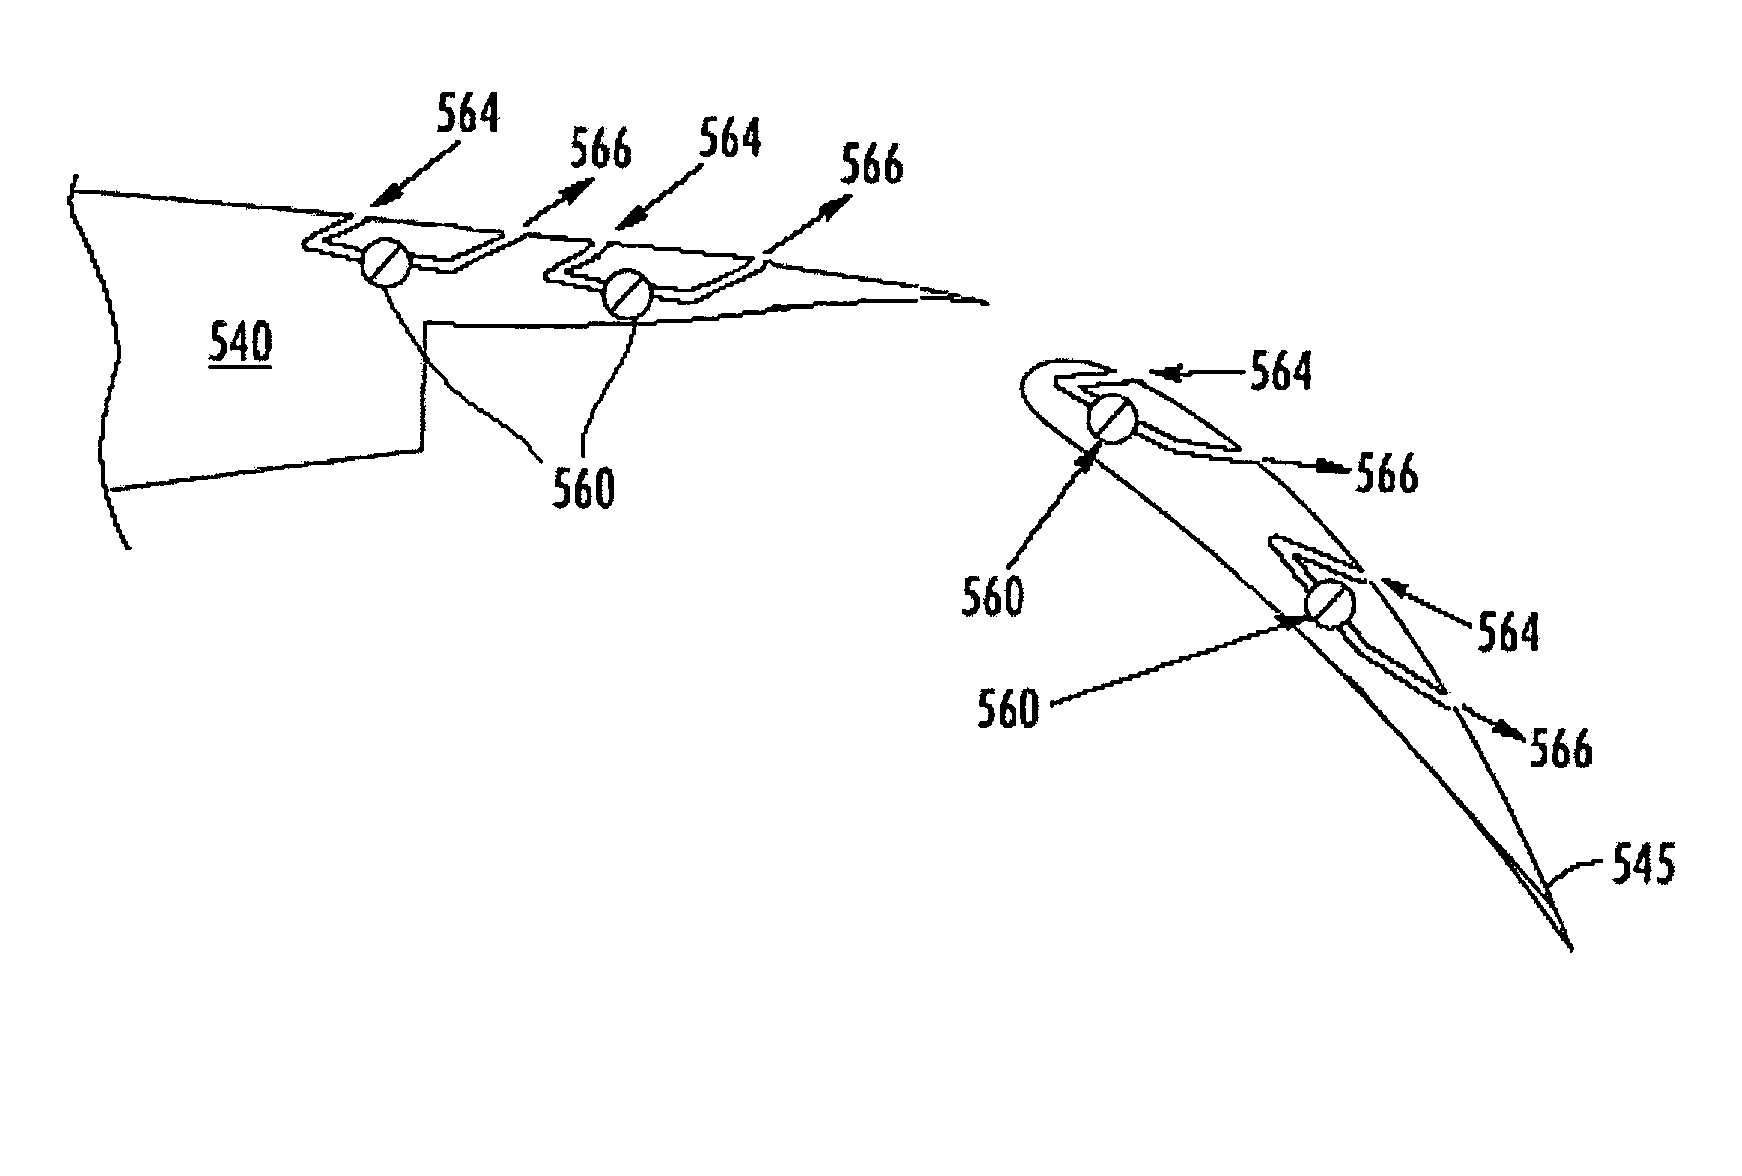 High-lift distributed active flow control system and method